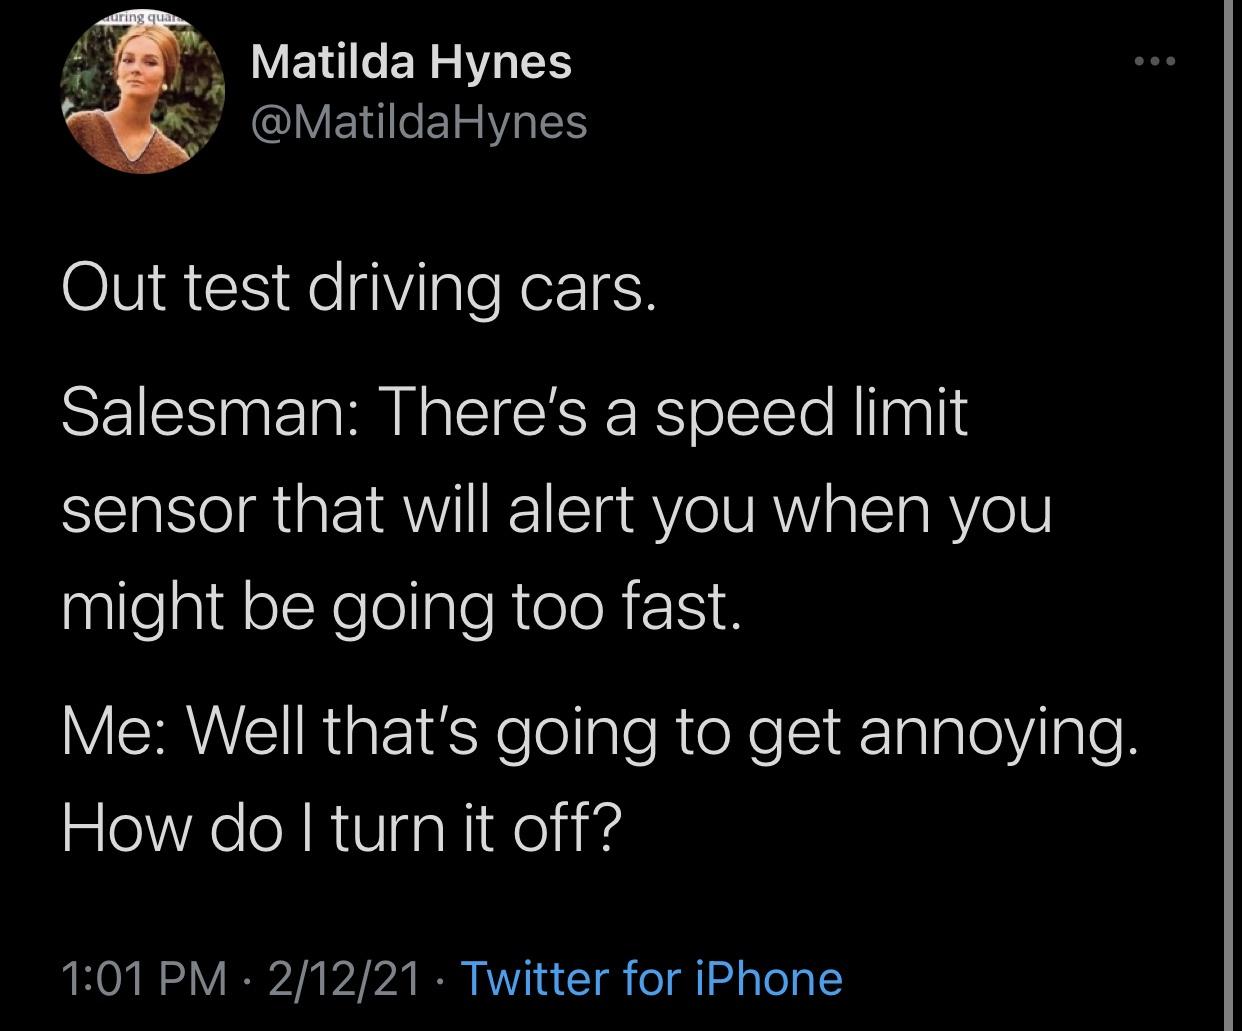 screenshot - Ting qua Matilda Hynes Hynes Out test driving cars. Salesman There's a speed limit sensor that will alert you when you might be going too fast. Me Well that's going to get annoying. How do I turn it off? 21221 Twitter for iPhone